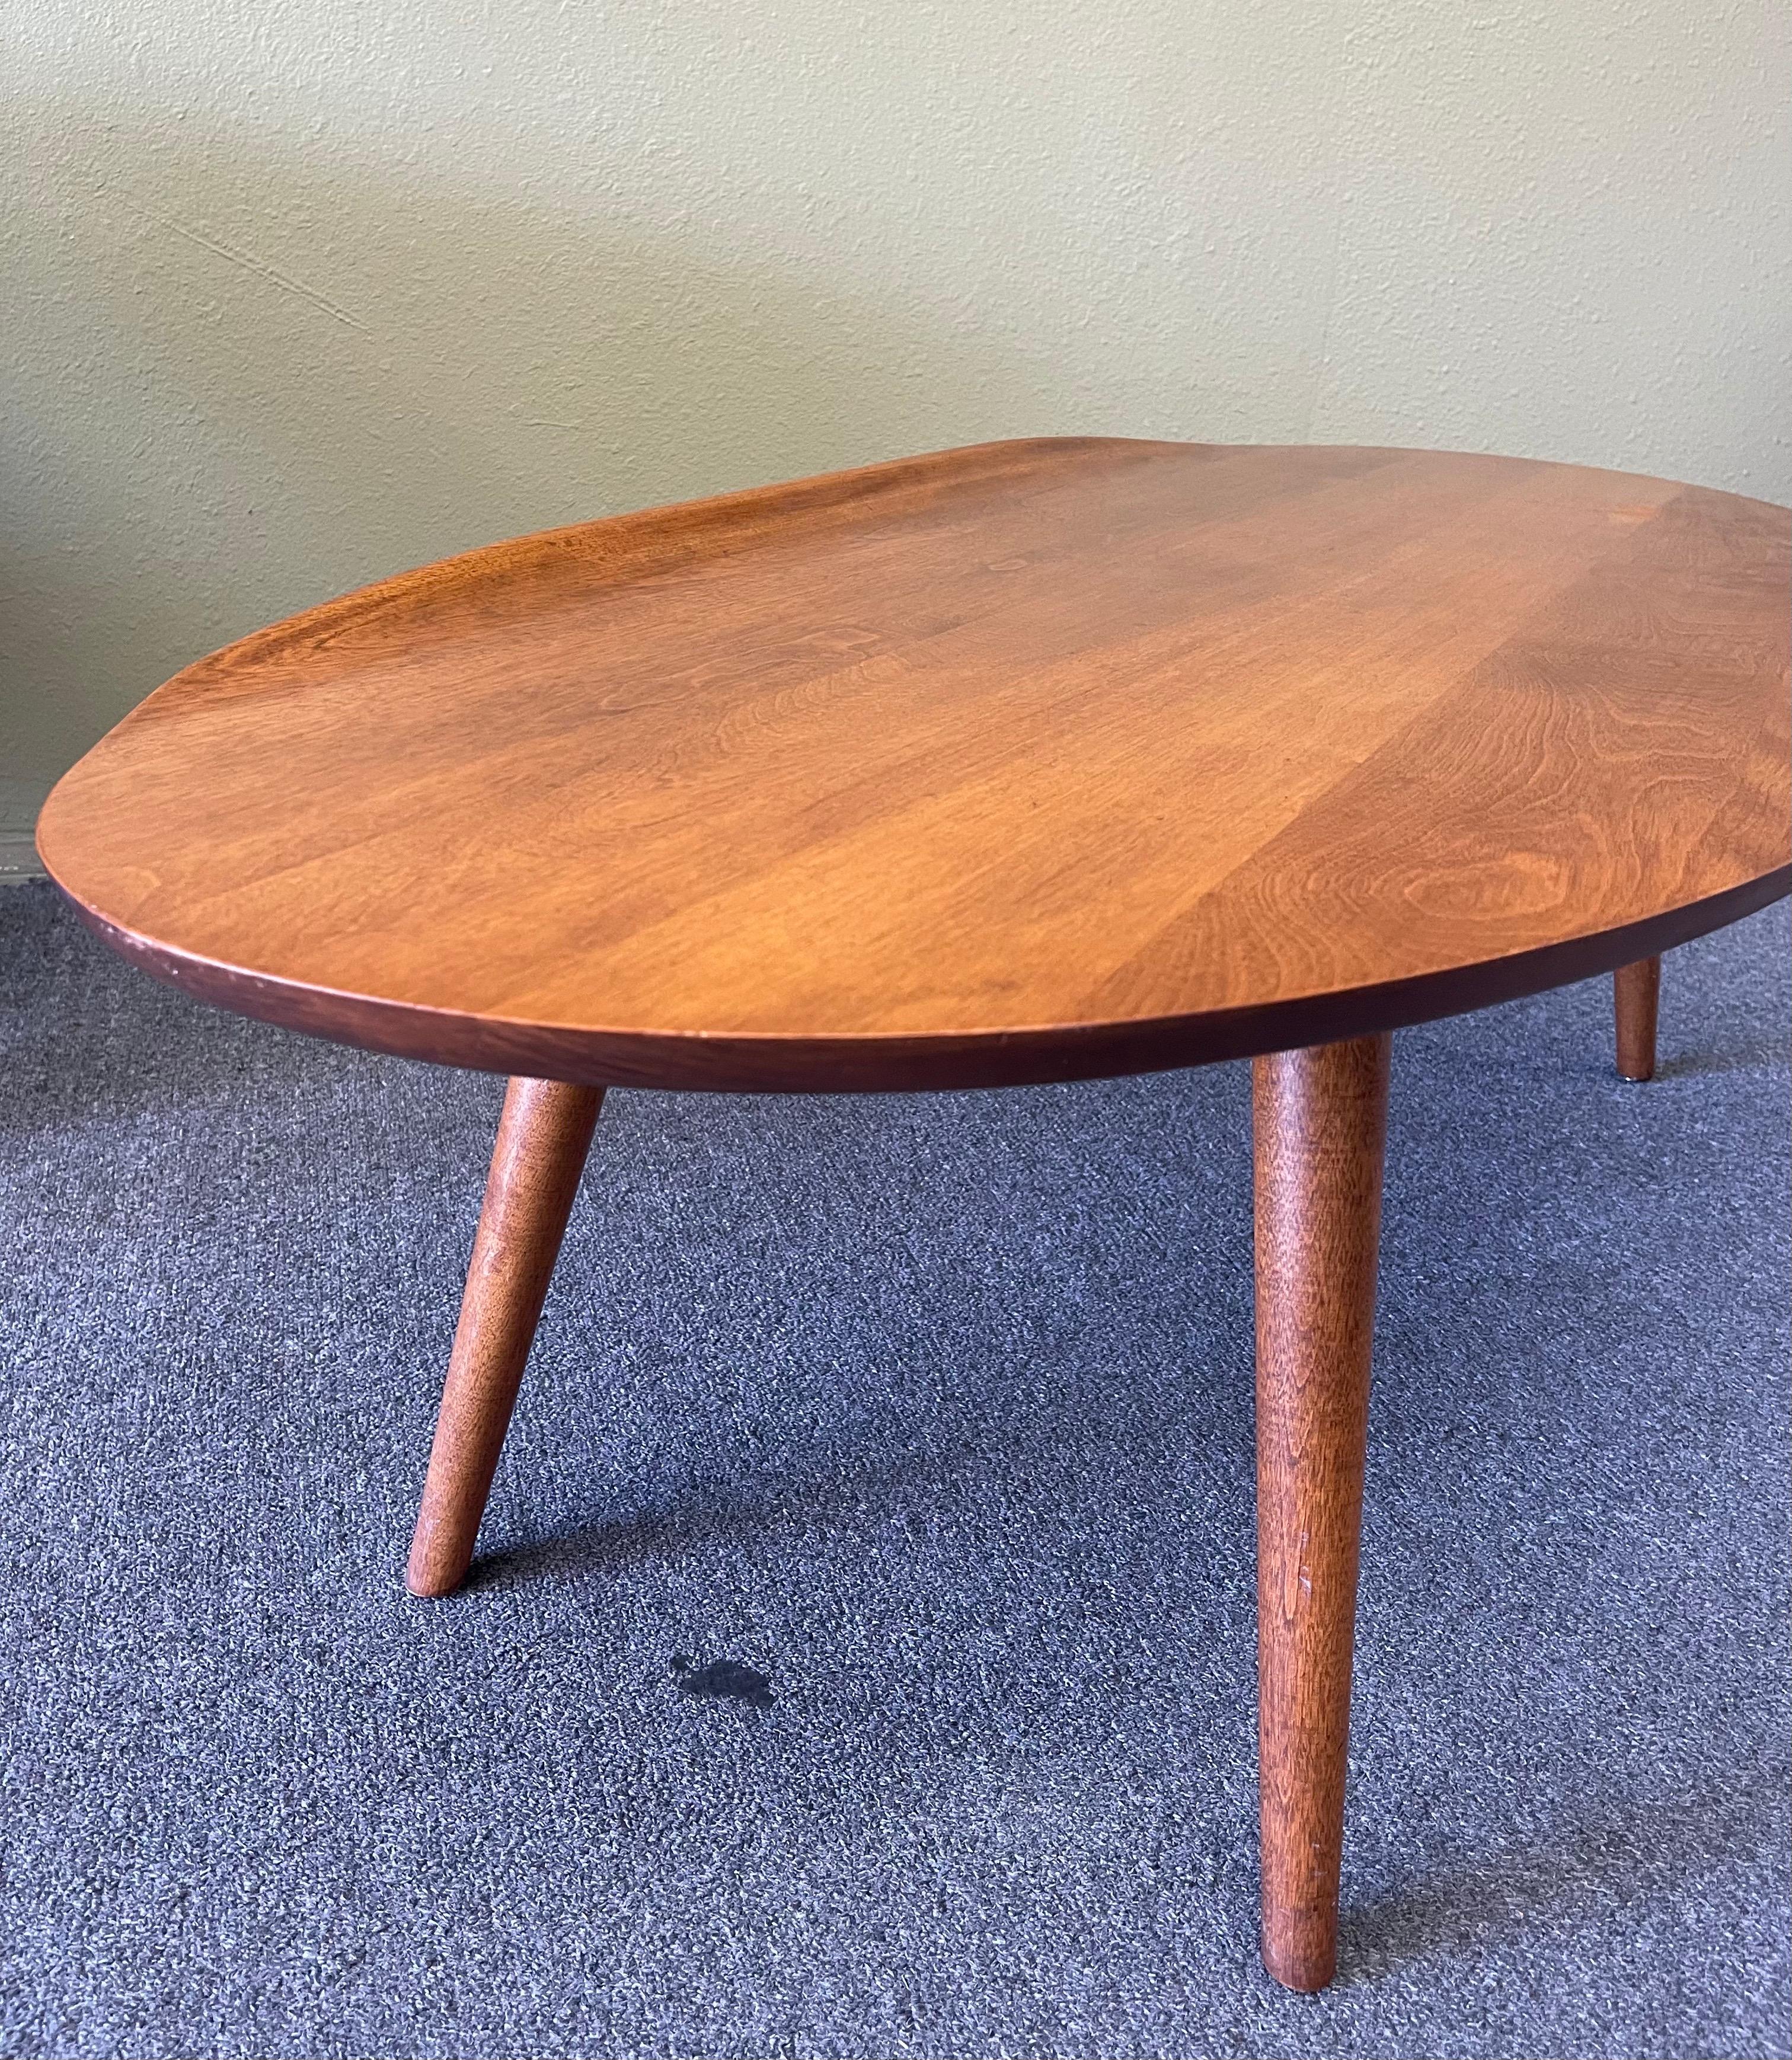 American Mid-Century Modern Surfboard Coffee Table by Russel Wright for Conant Ball